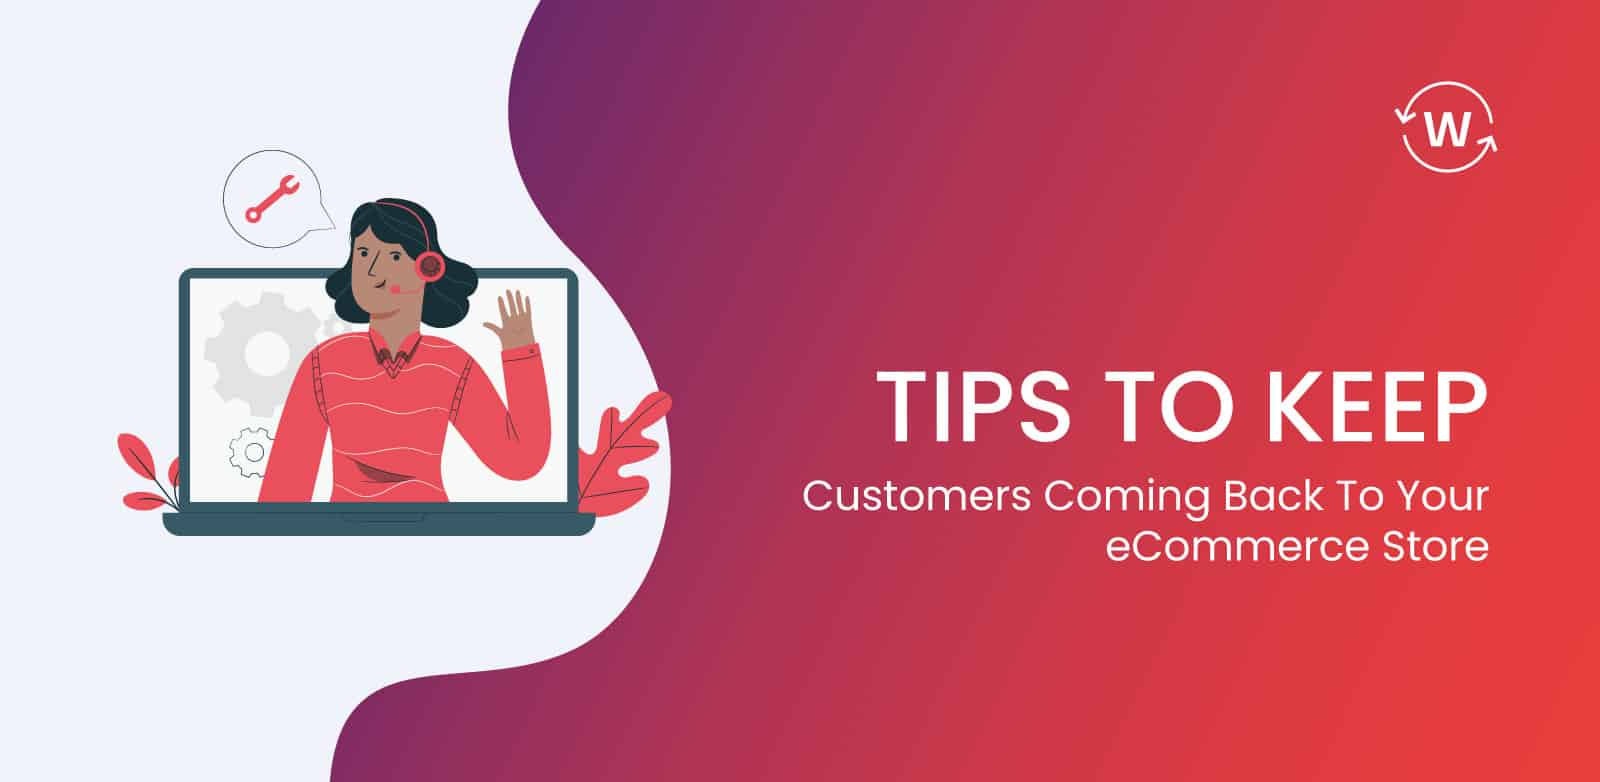 tips-to-keep-customers-coming-back-to-your-ecommerce-store